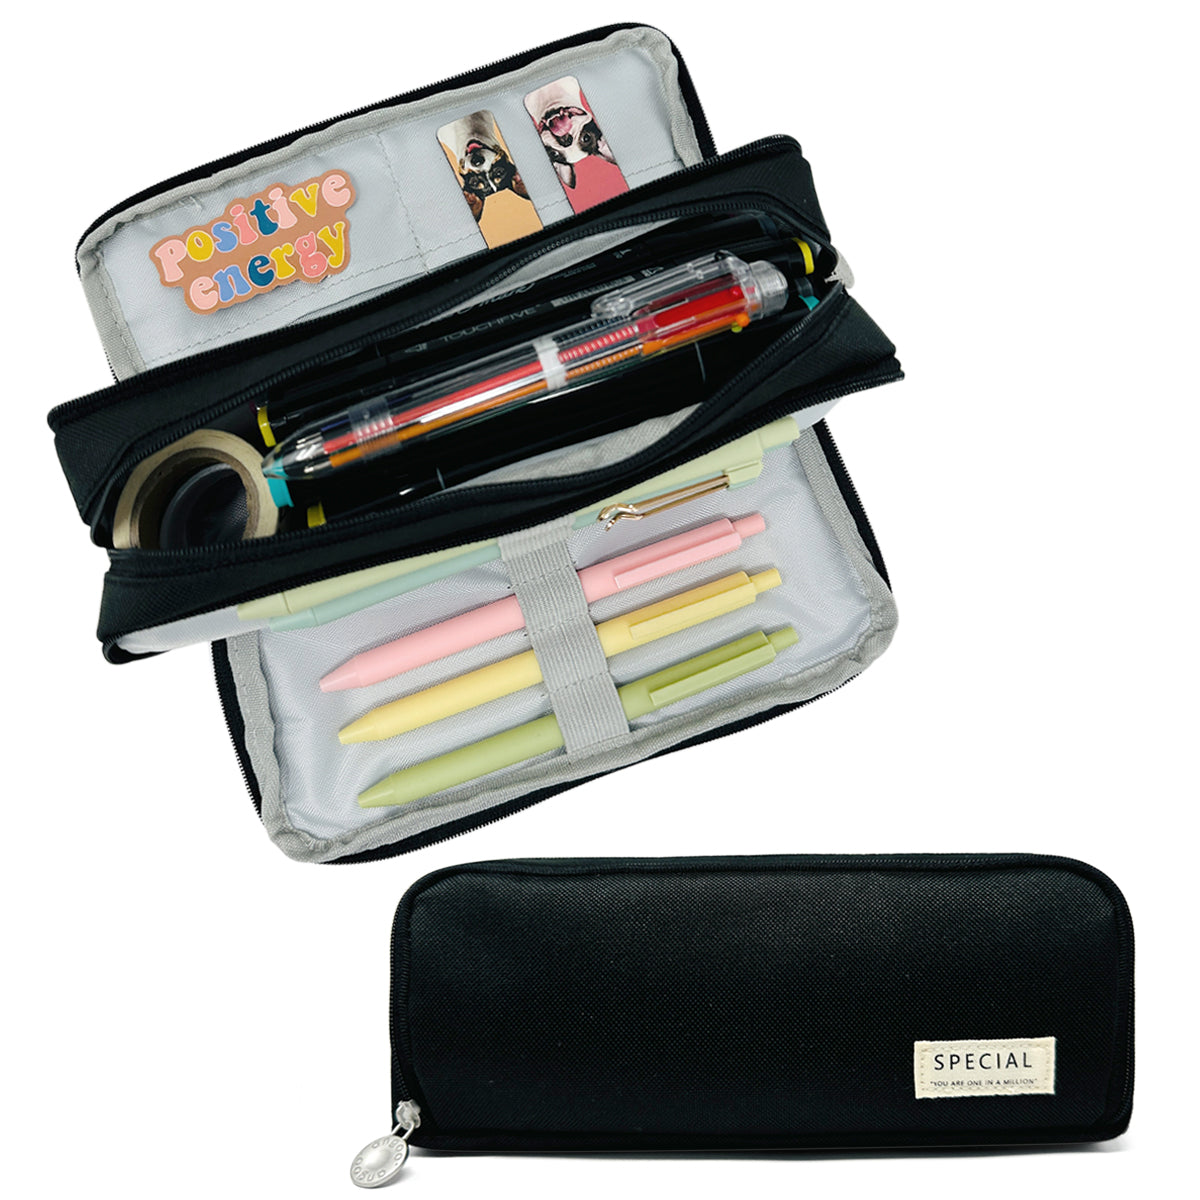 Wrapables Large Capacity Pencil Case, 3 Compartment Pencil Pouch for Stationery Pens Black